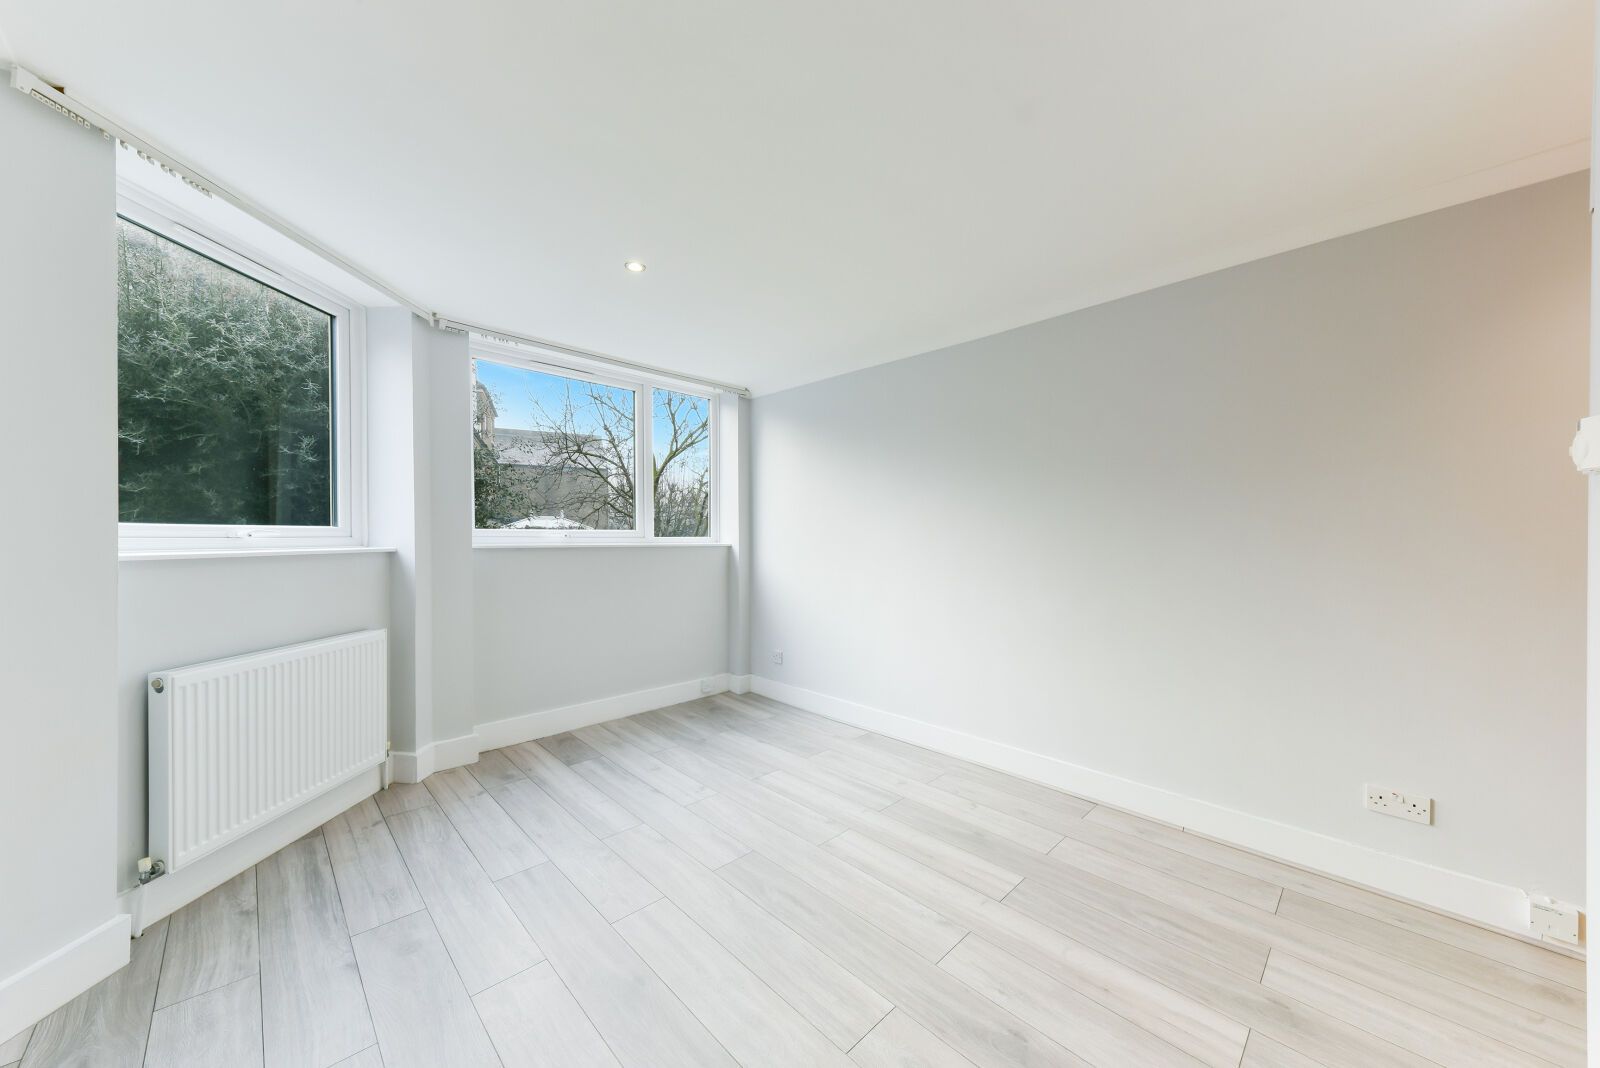 Flat to rent, Available from 15/03/2024 Hurlingham Road, London, SW6, main image